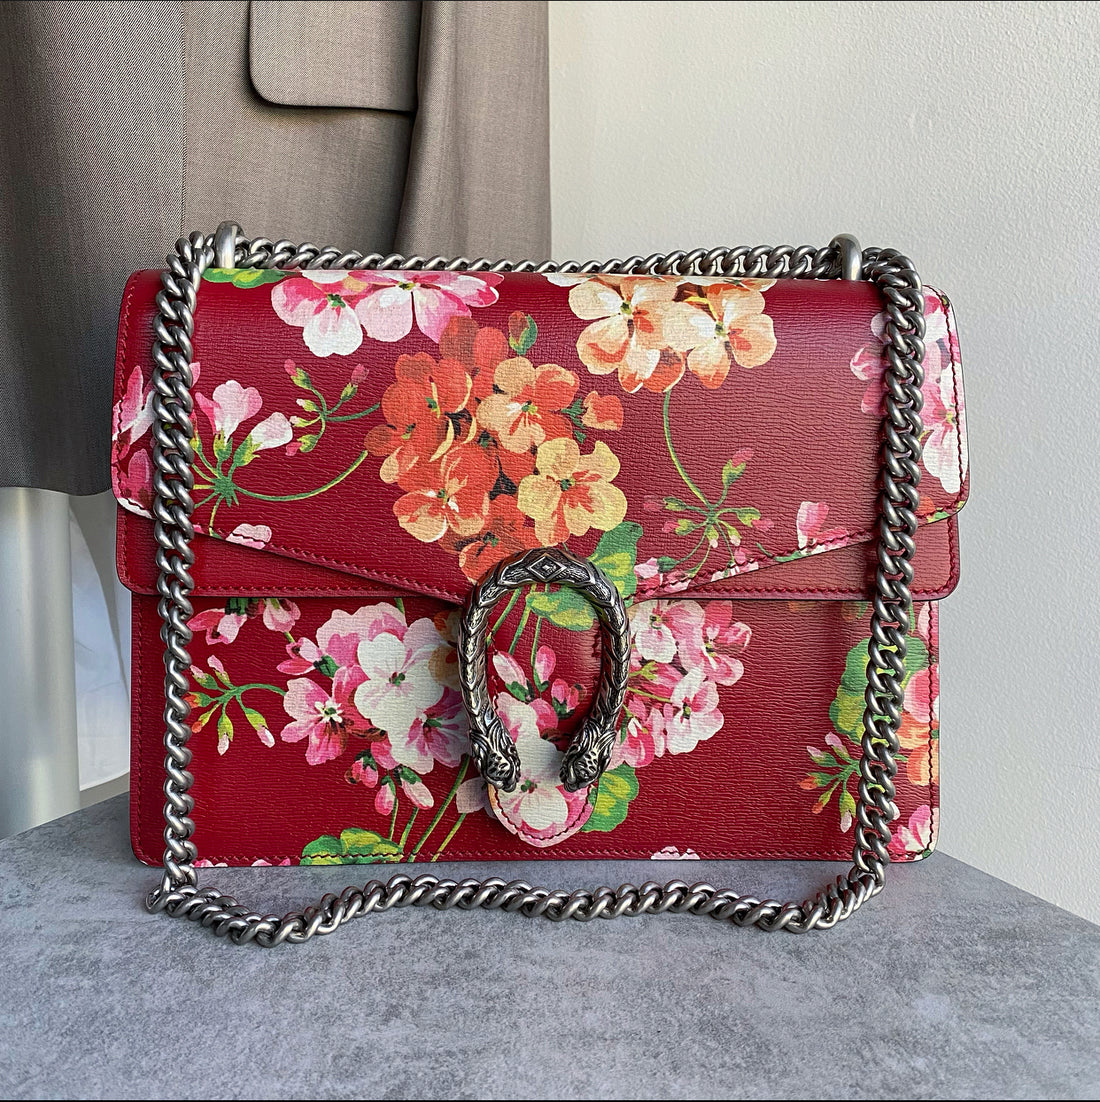 Gucci Blooms Medium Red Dionysus Limited Edition